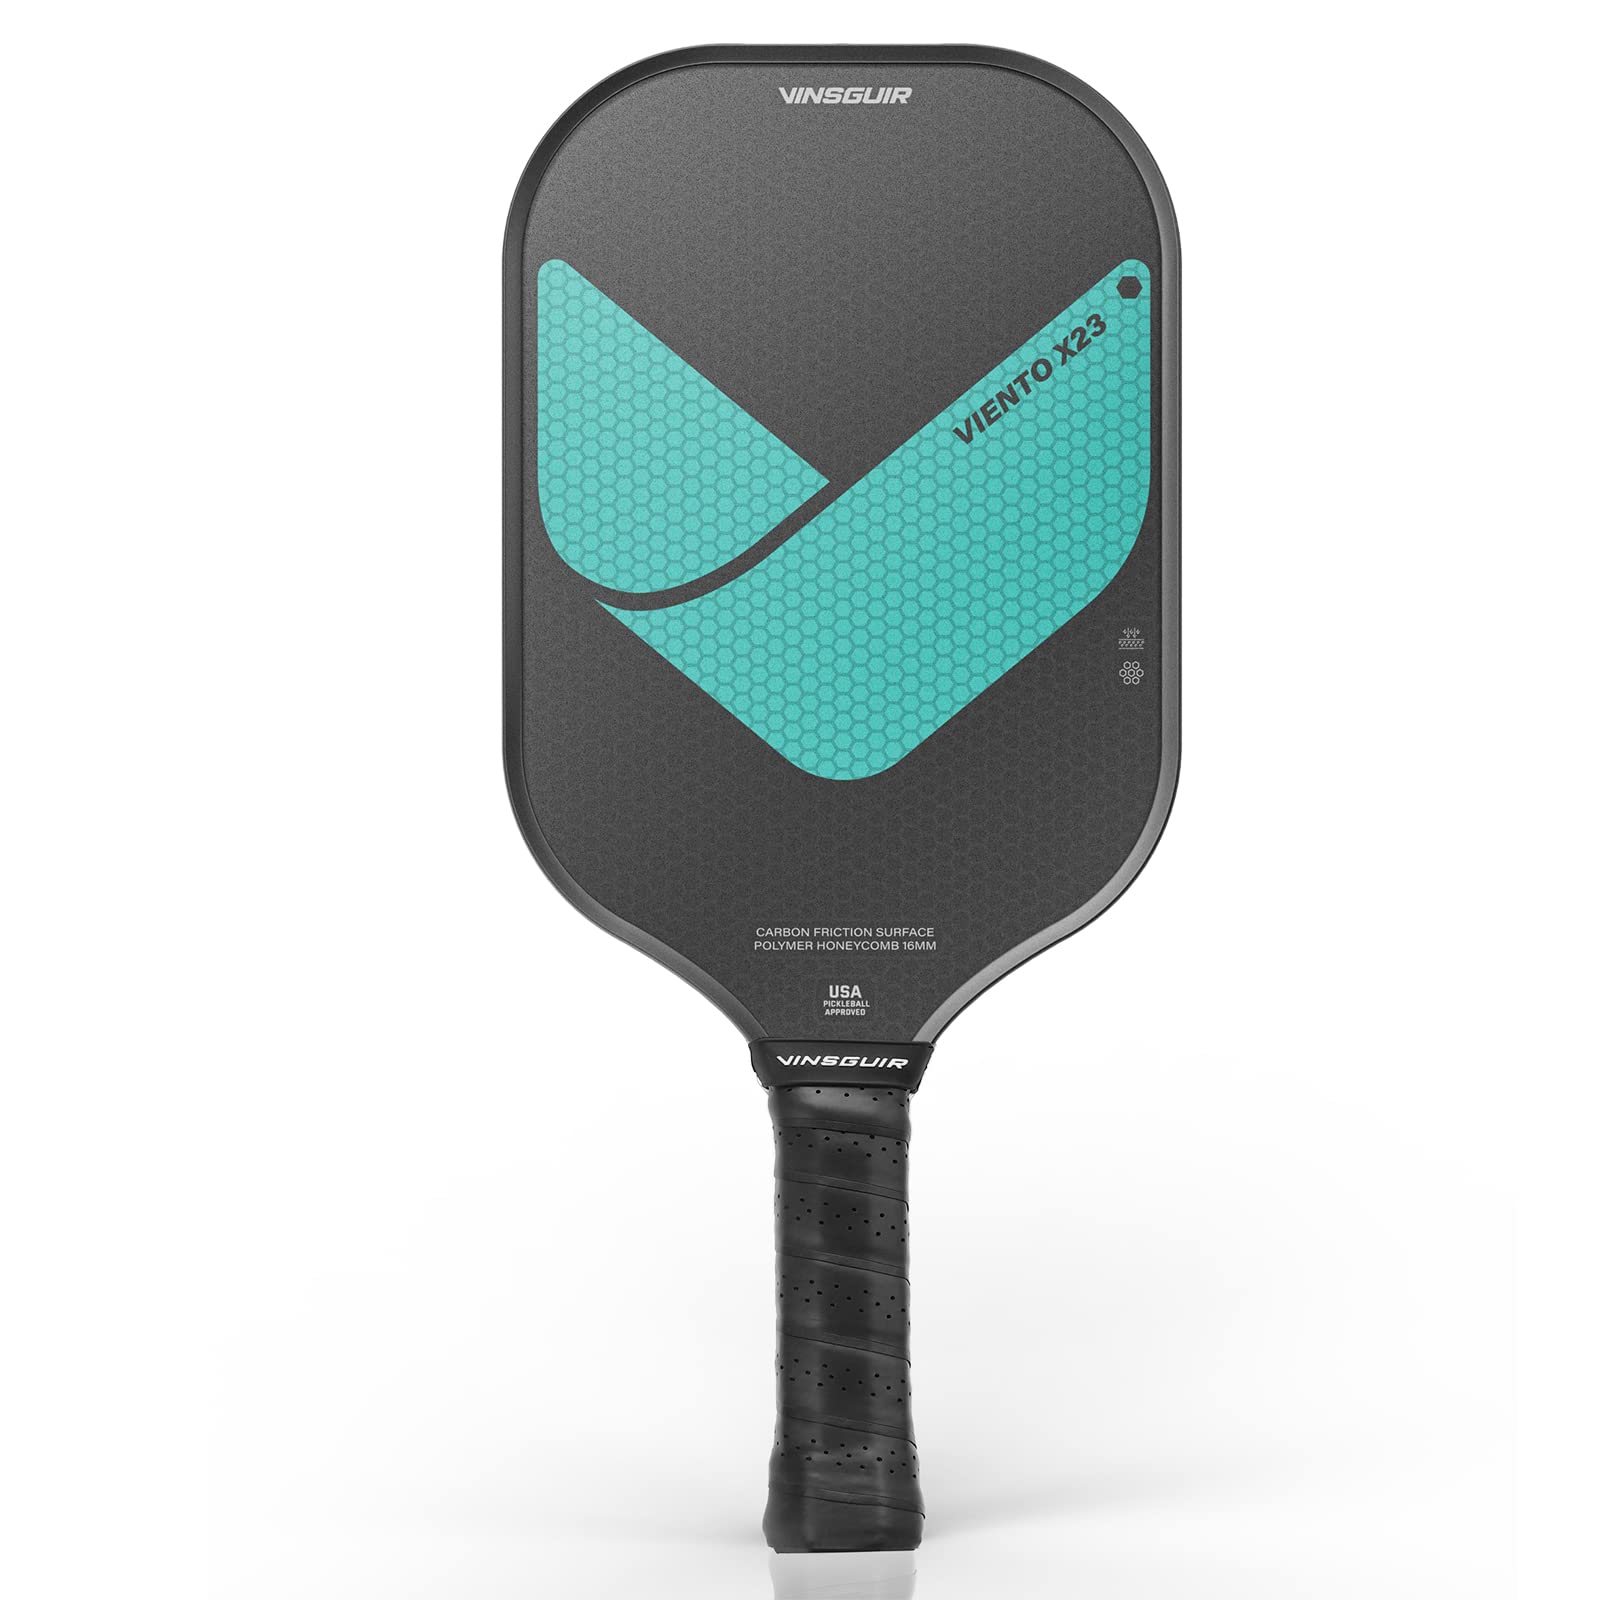 VINSGUIR Pickleball Paddles (Frosted Carbon Fiber Surface with Reinforced 16mm Polypropylene Honeycomb Core) $25.79 + free shipping w/ Prime or orders $35+